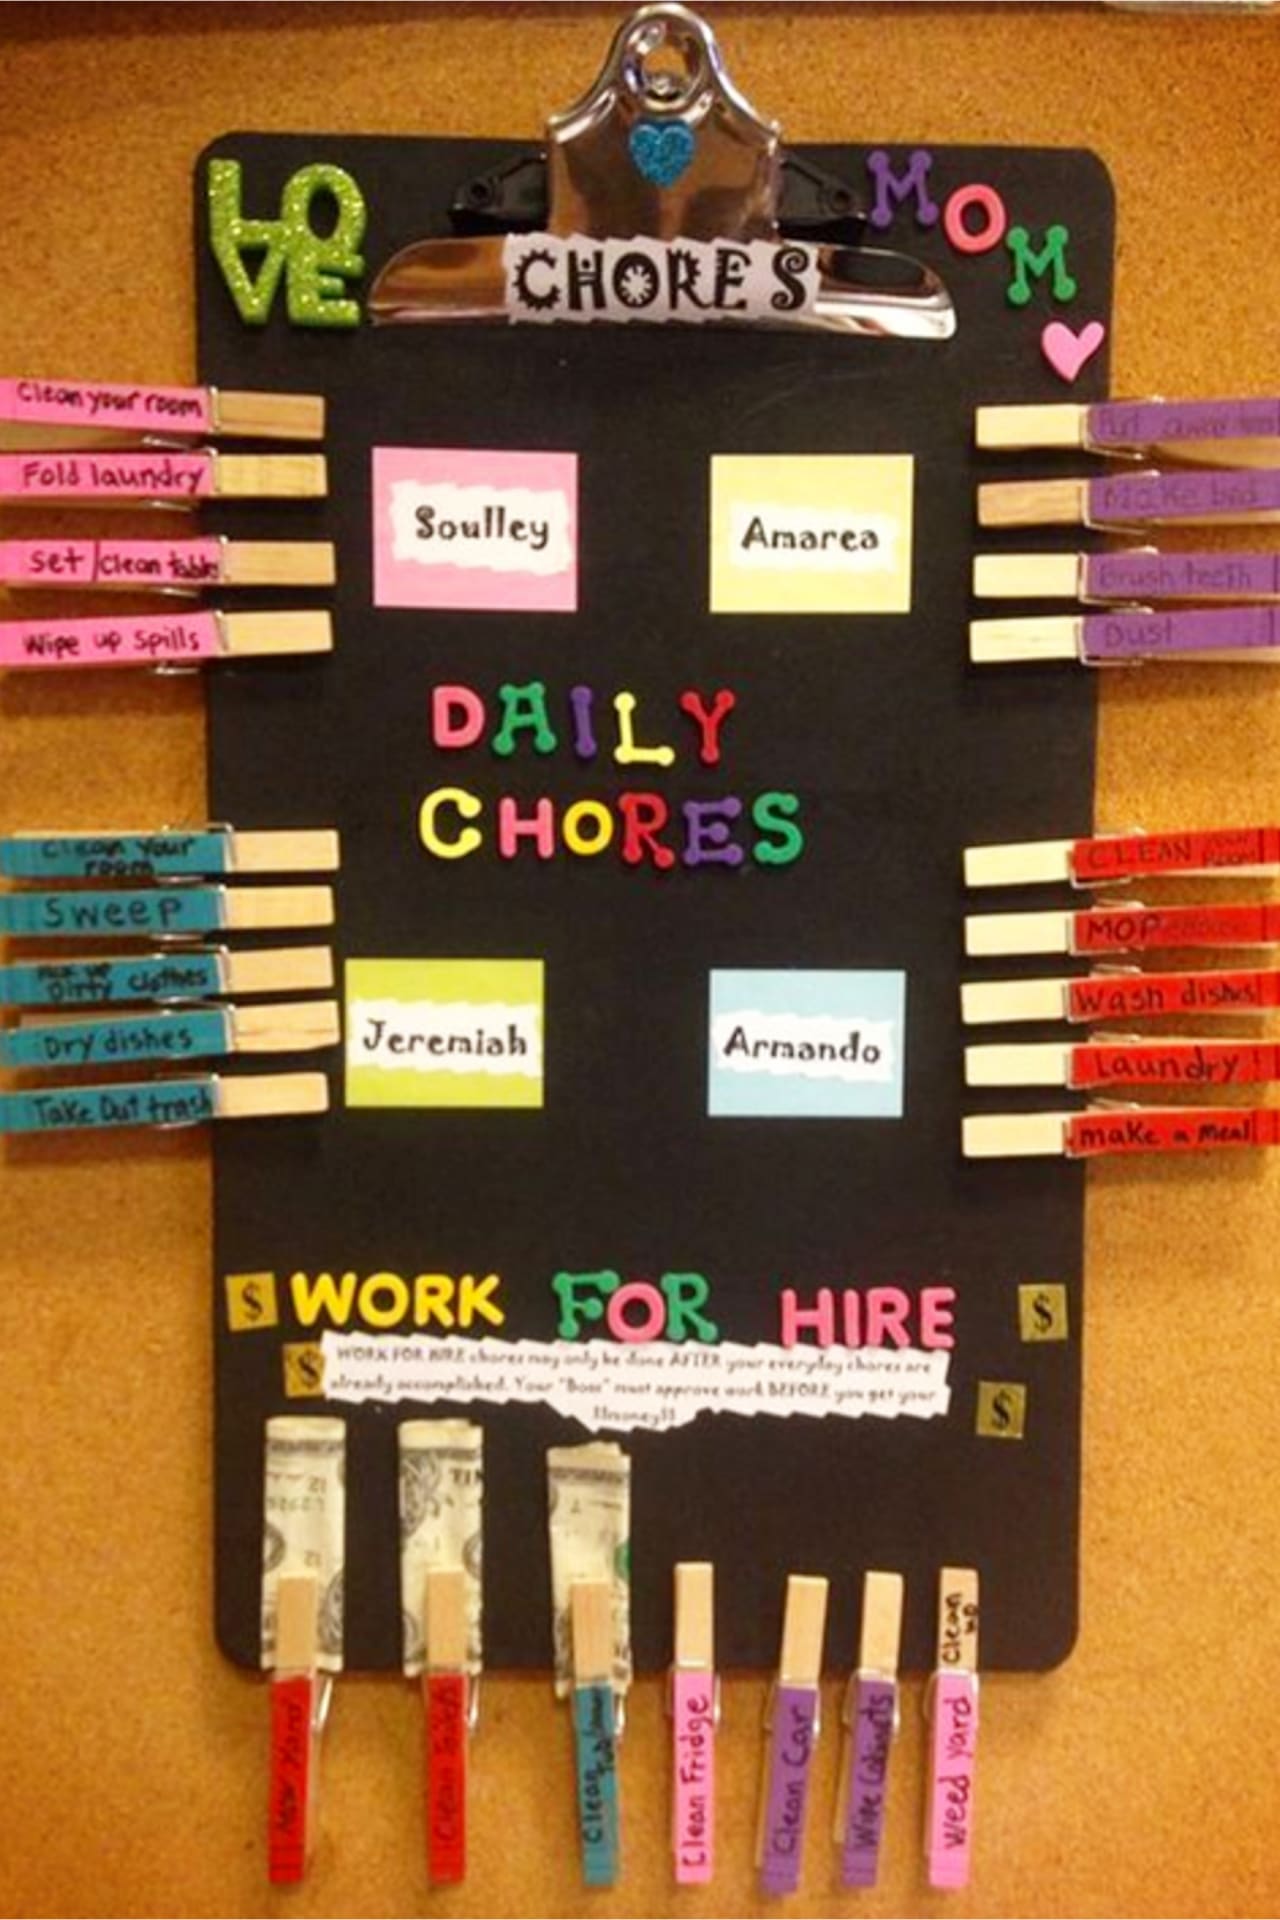 Dollar Store Hacks - DIY organizing projects for kids chores.  DIY chore chart - creative dollar store organizing project.  This is how to be an organized mom - get kids to do chores with a DIY responsibility chart  and chore system you can customize by age like this.